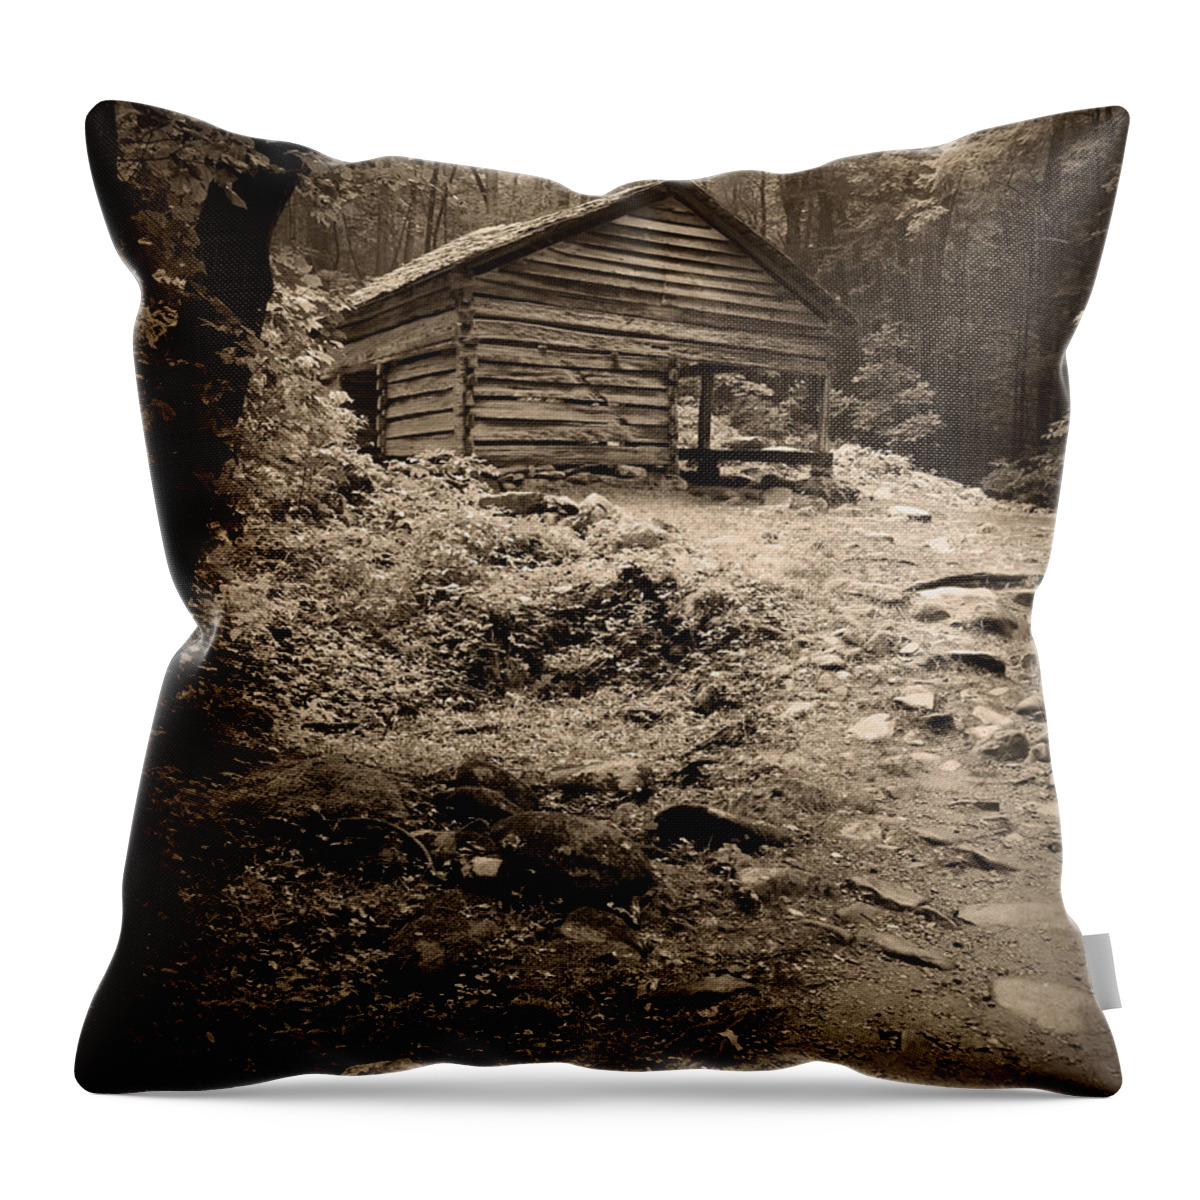 Rustic Throw Pillow featuring the photograph Rustic Cabin by Larry Bohlin